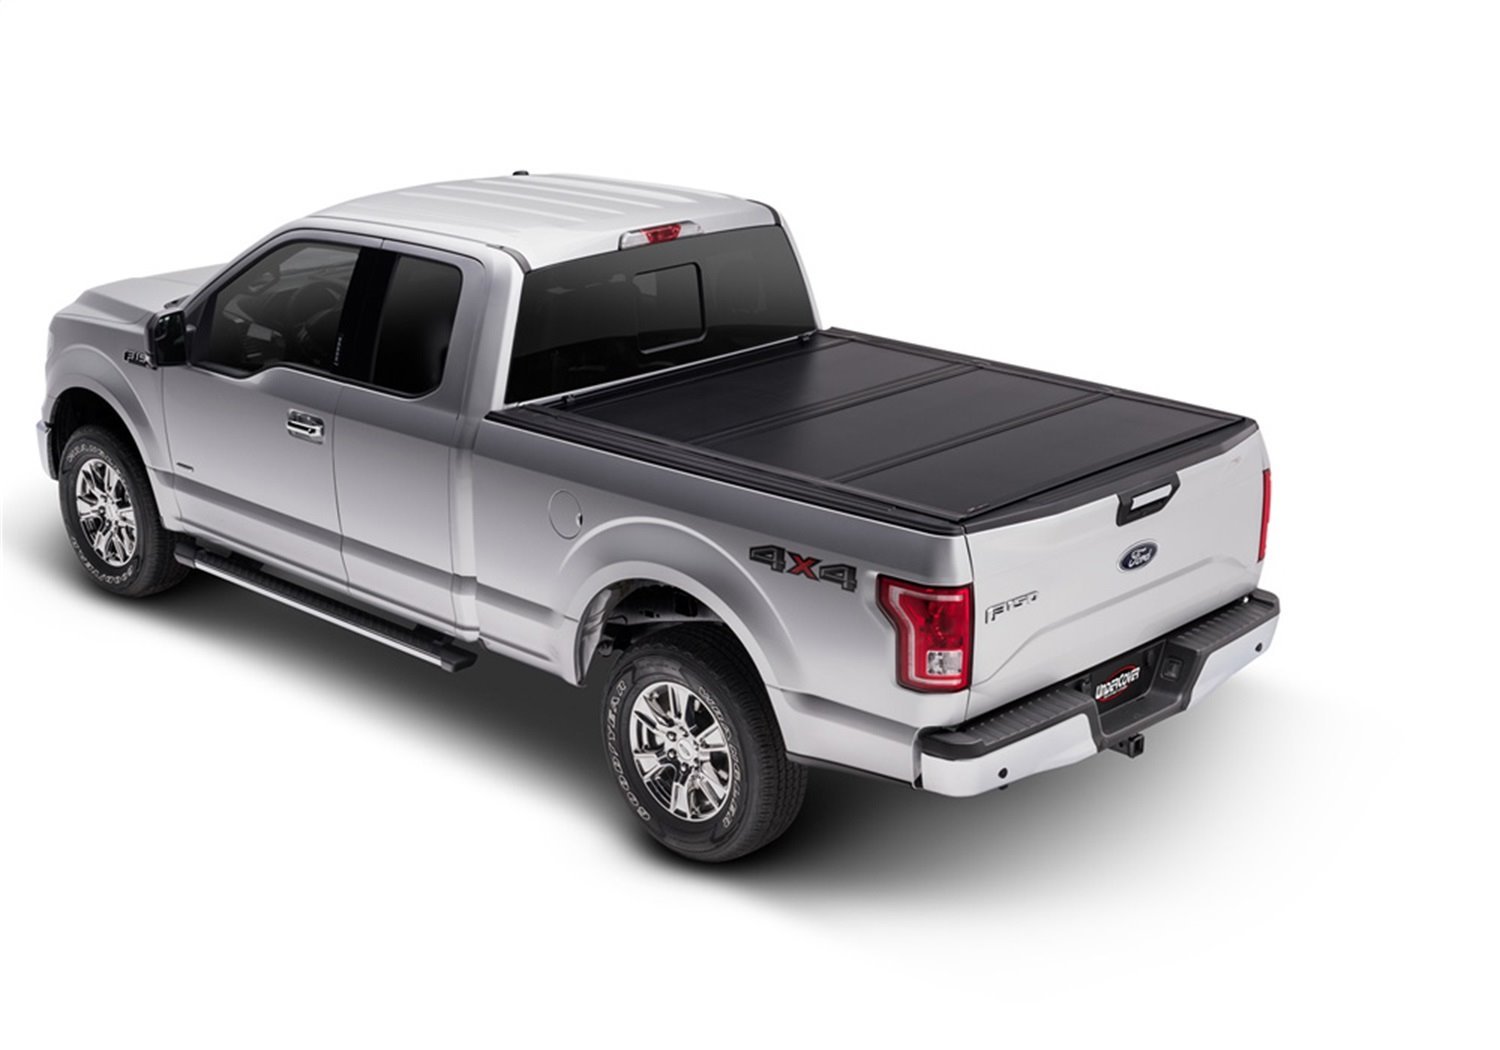 UX22026 Ultra Flex Hard Folding Cover, Fits Select Ford F-250/350 8'2" Bed STD/EXT/Crew, Matte Black Finish